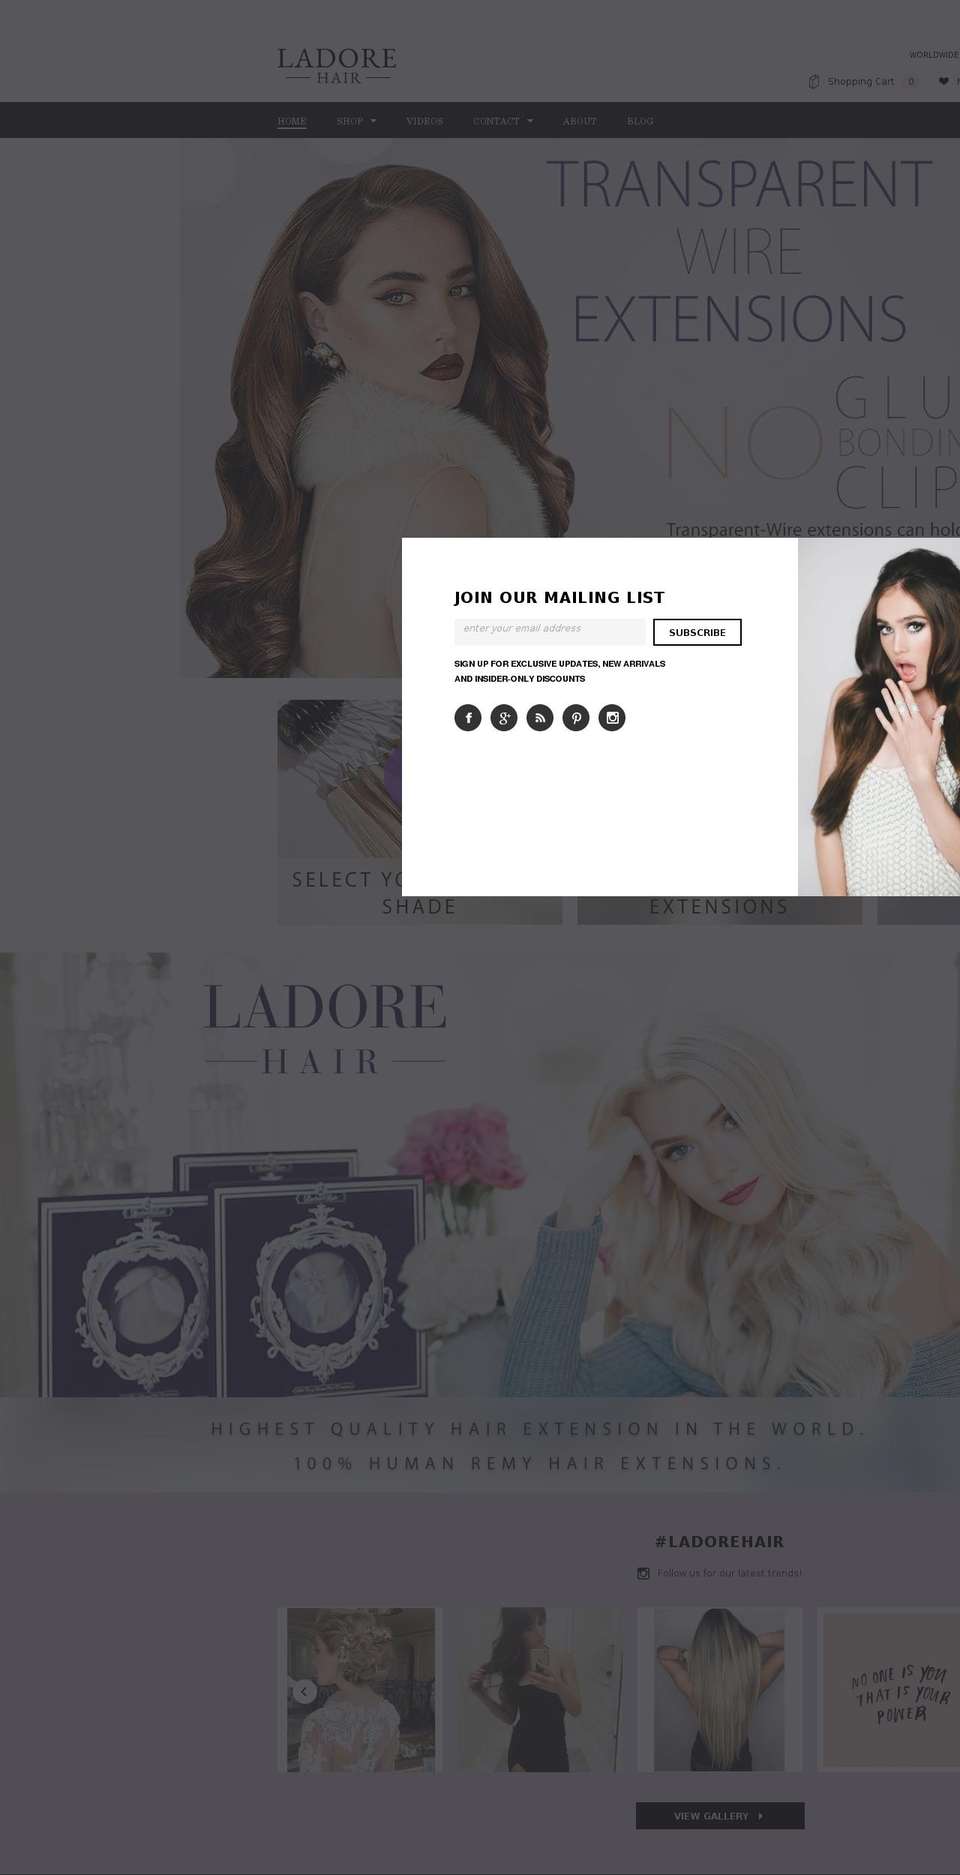 Clean Shopify theme site example ladorehair.com